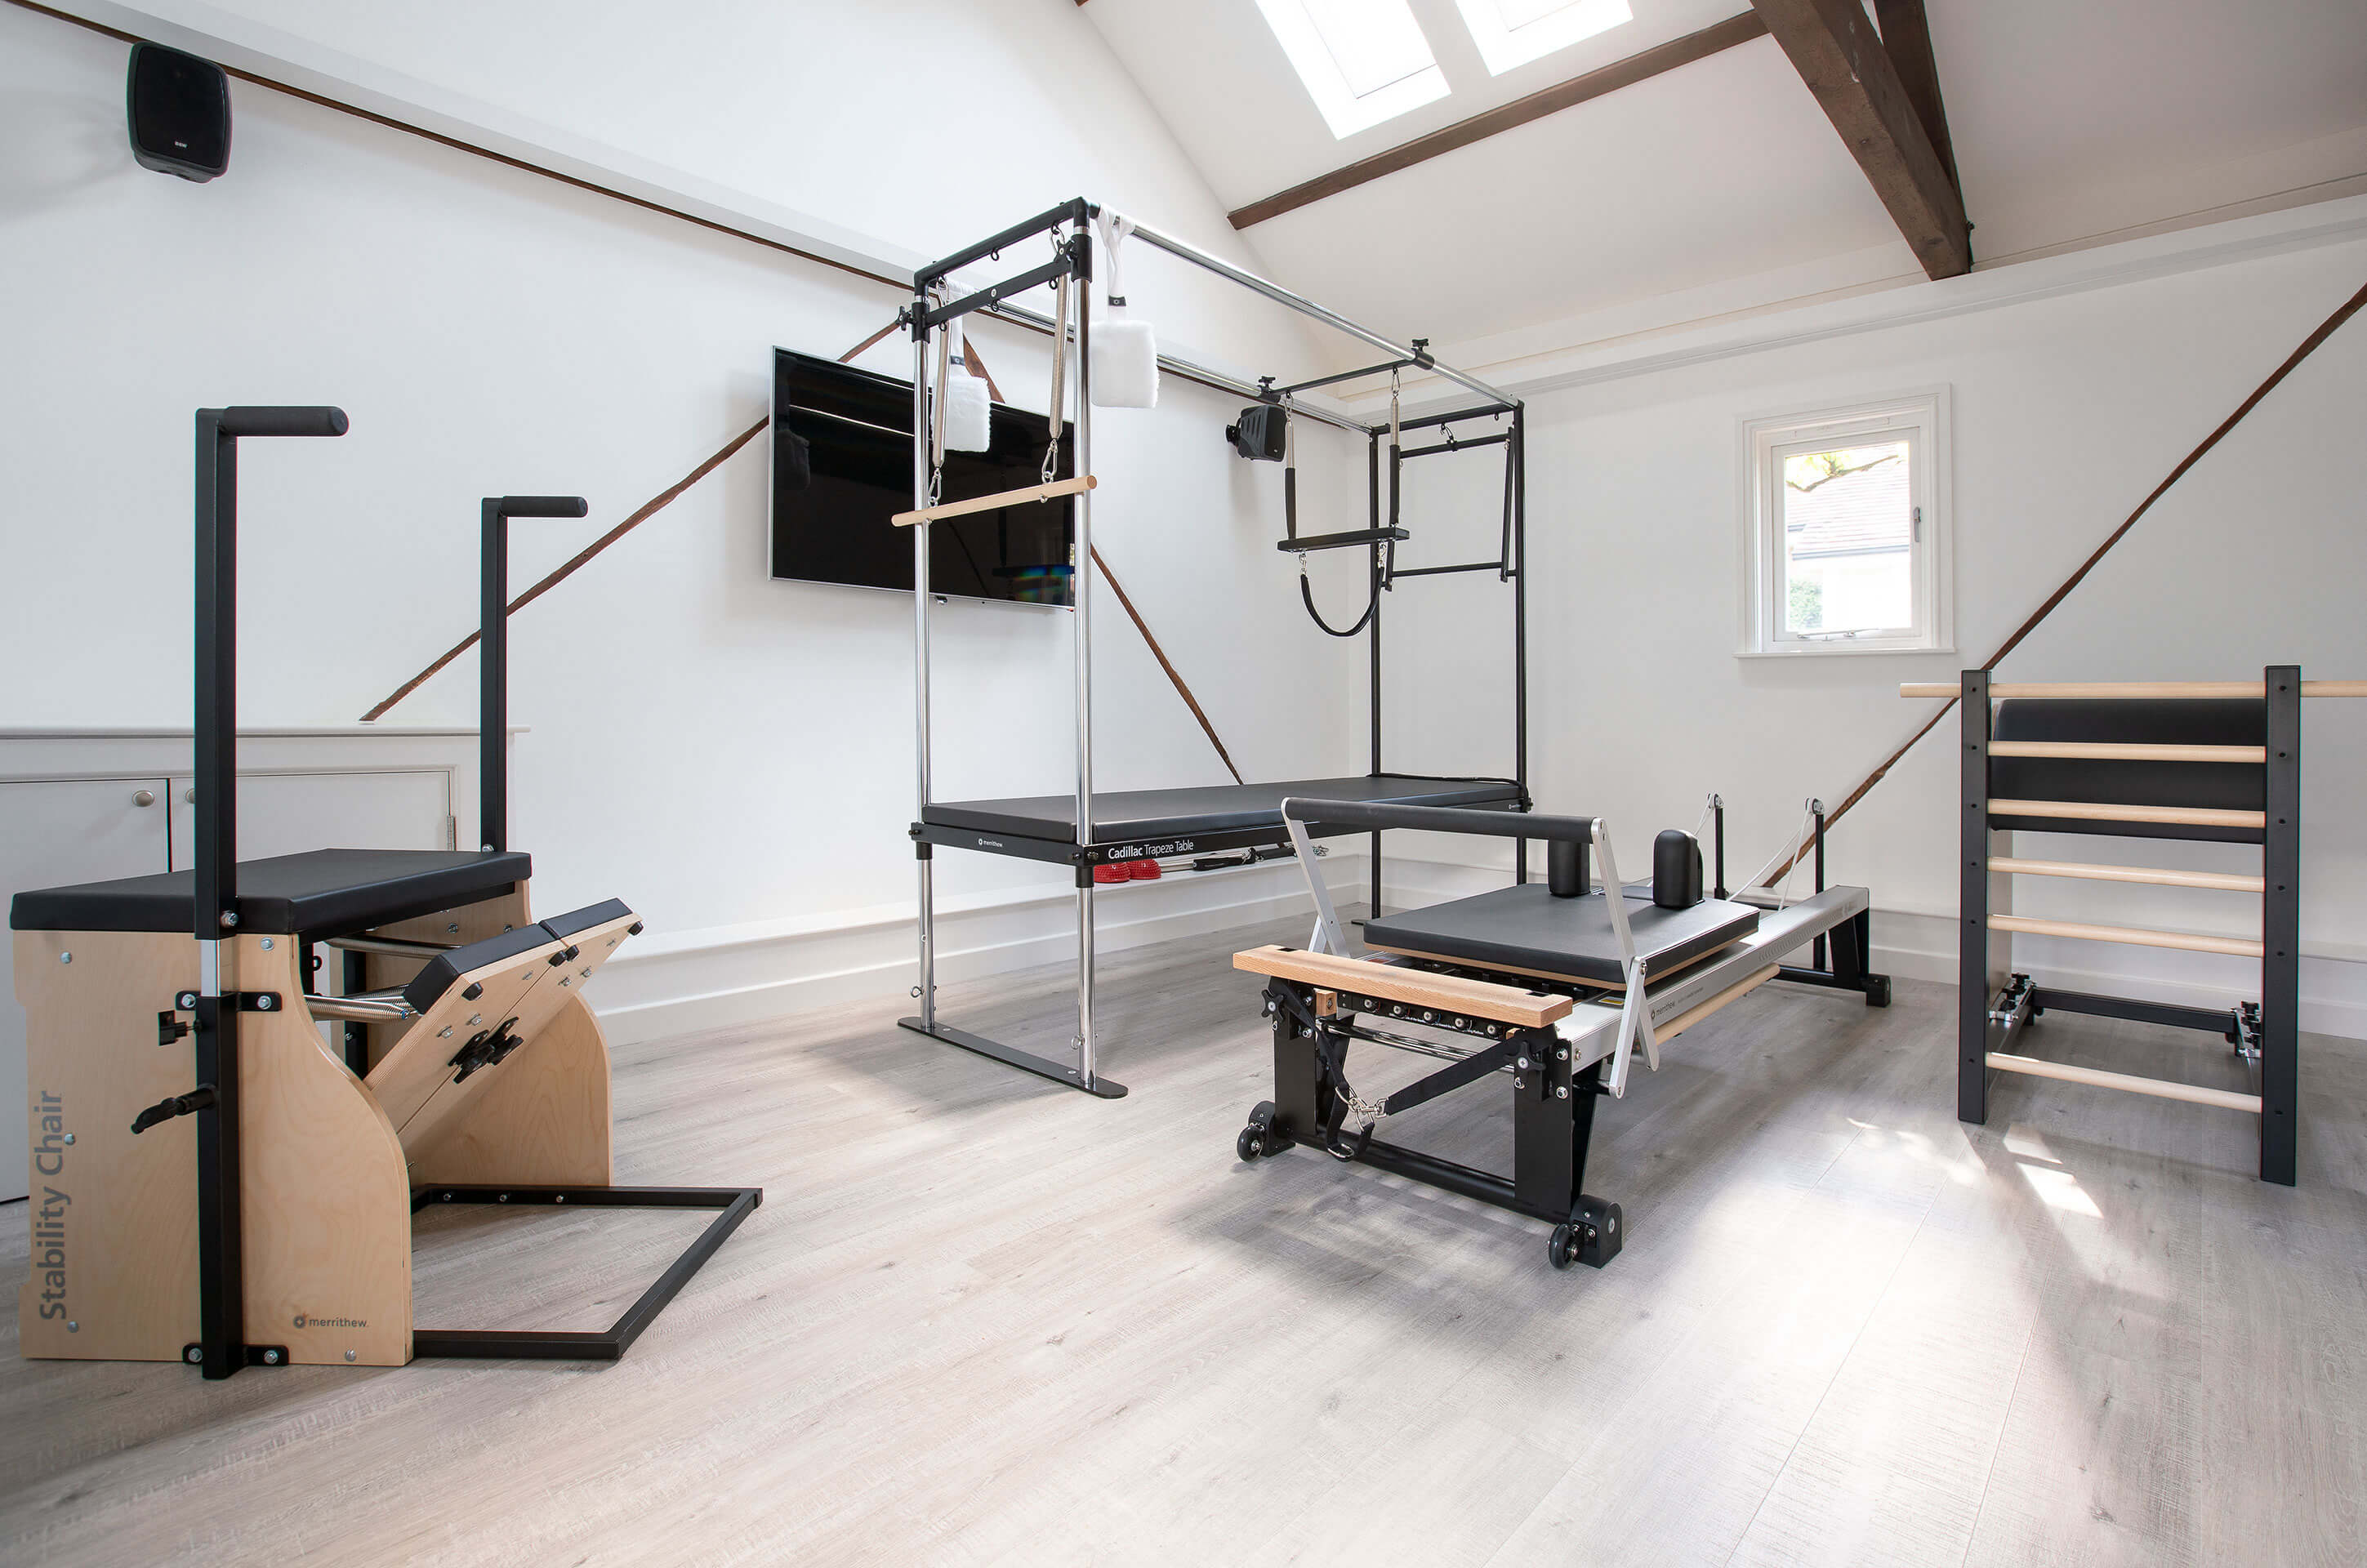 We have new Merrithew Pilates equipment including a Reformer, Cadillac and Chair as shown